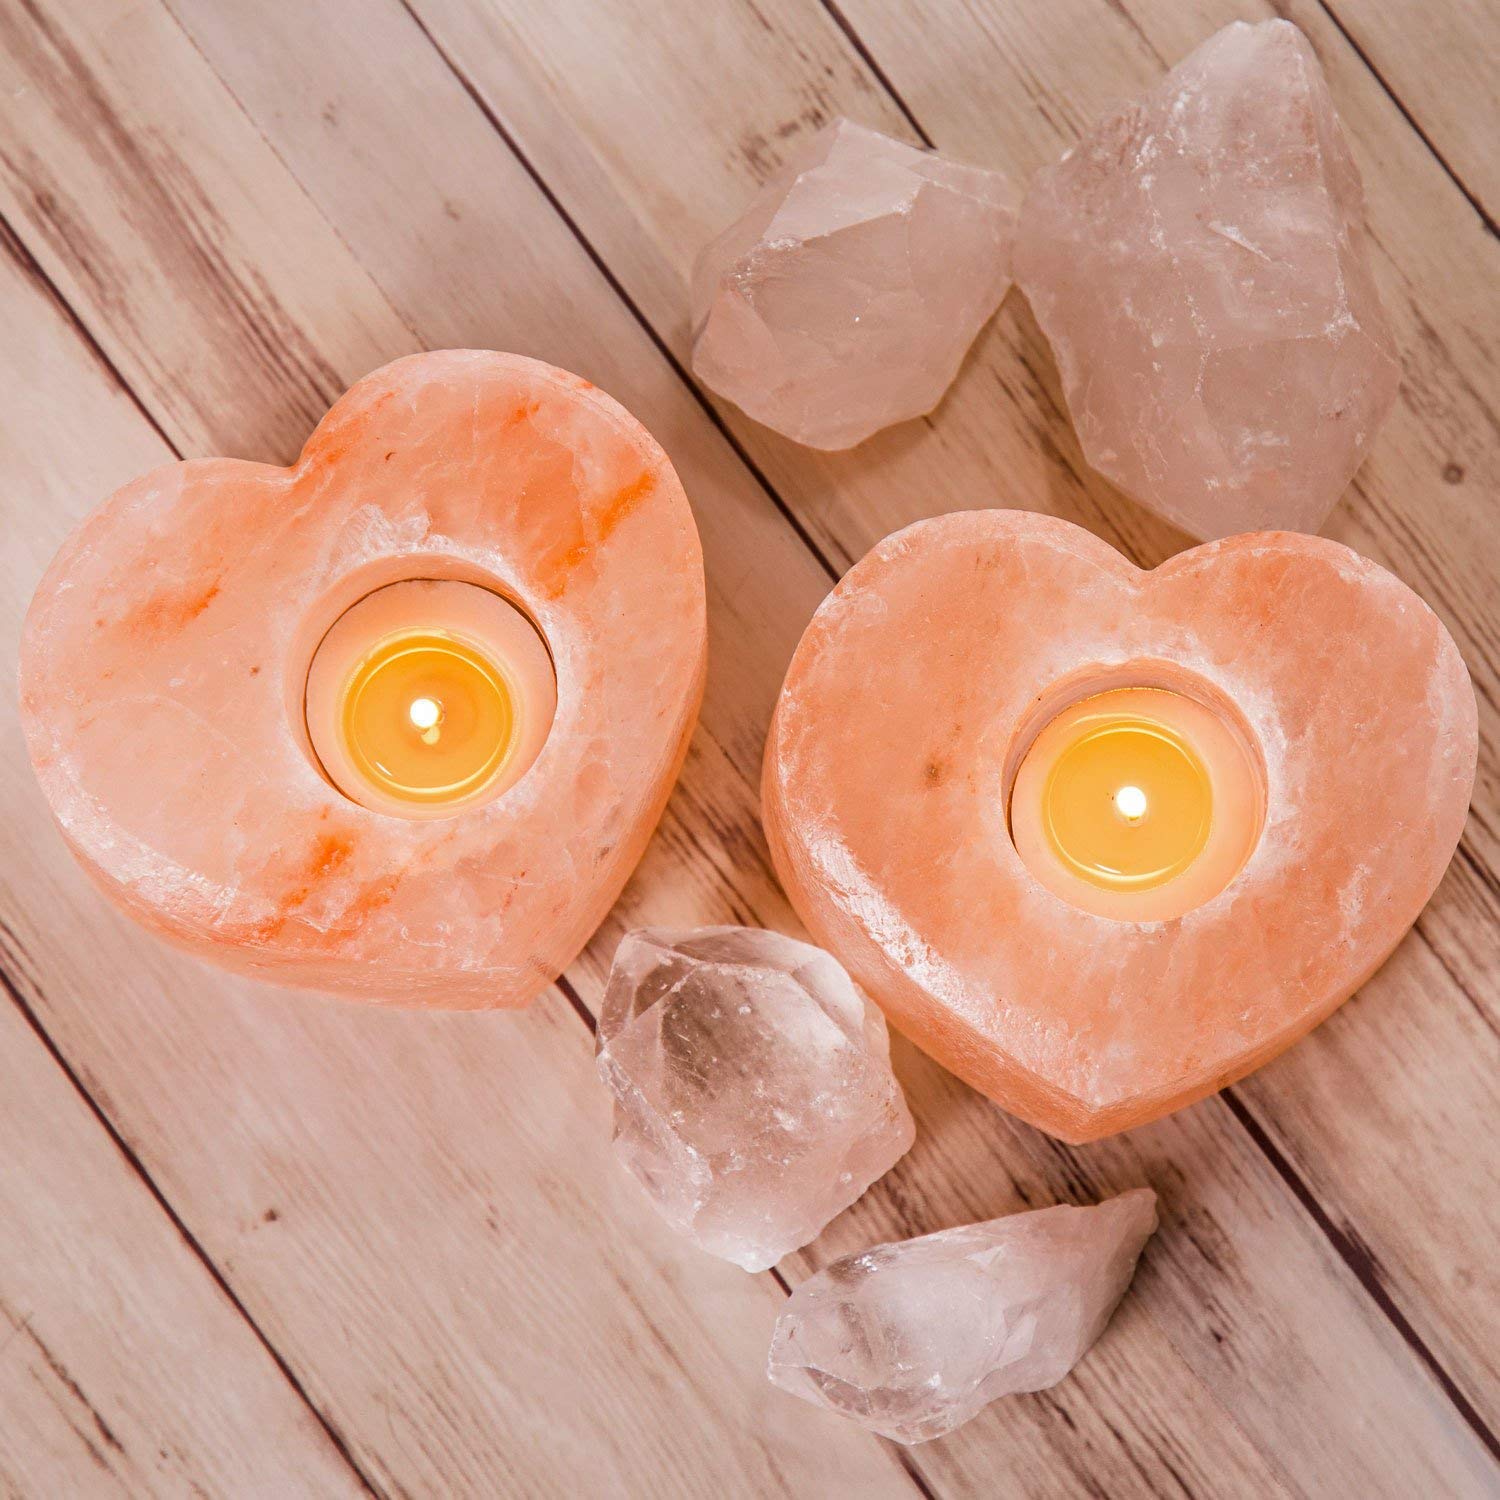 himalayan glow Shape Natural Pink Heart Style Tealight, 100% Pure Crystal Salt Candle Holder | Night Light & Decorative Light, Perfect Valentine's Day Gift, 3 Inches, Orange